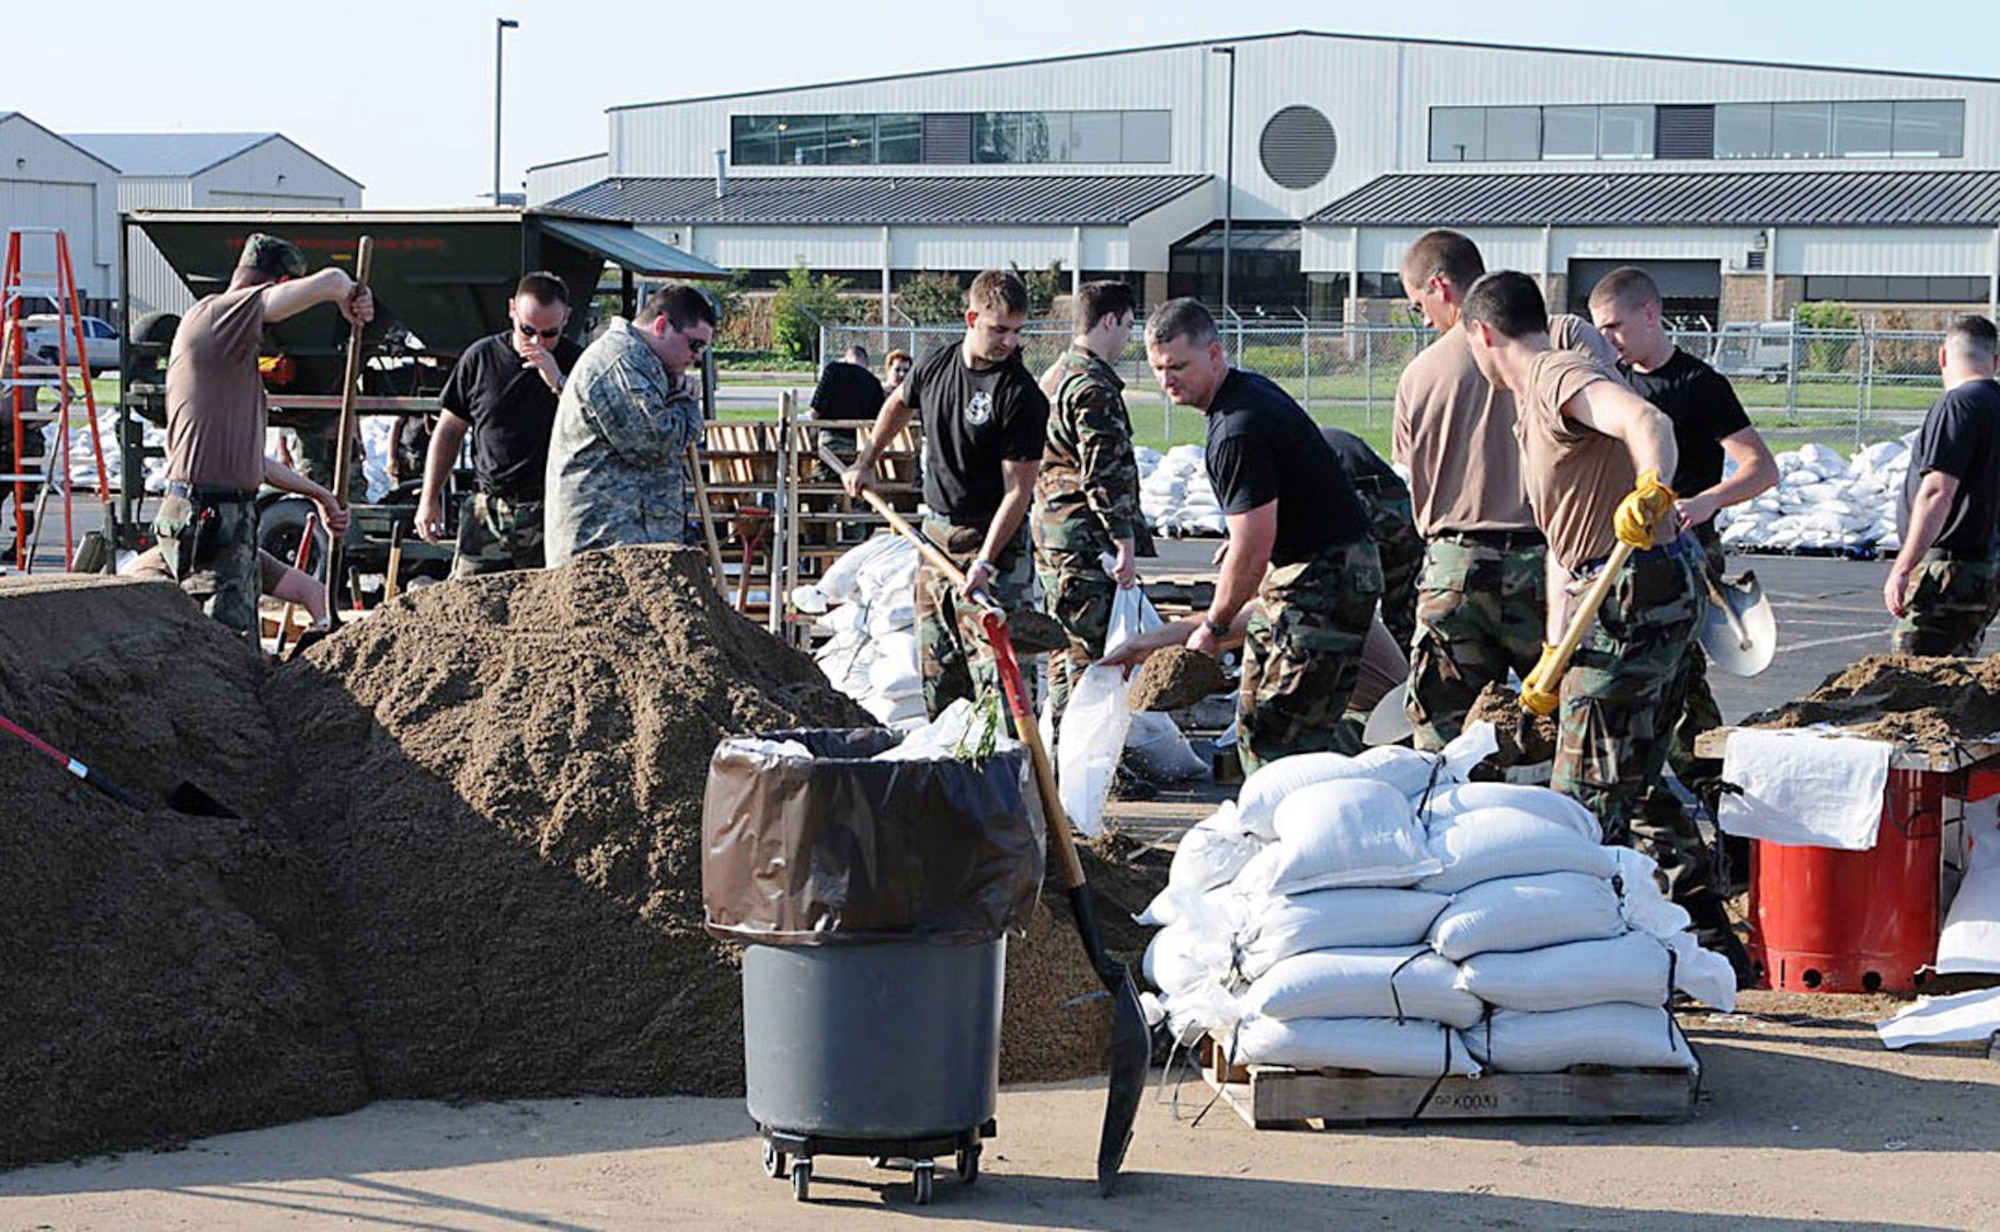 Indiana Air National Guard members continuously fill sandbags in relief following the flood waters that hit Vigo County June 7. The guardsmen are assigned to the 181st Intelligence Wing from Terre Haute, Ind. (U.S. Army photo/Staff Sgt. Chris Jennings)